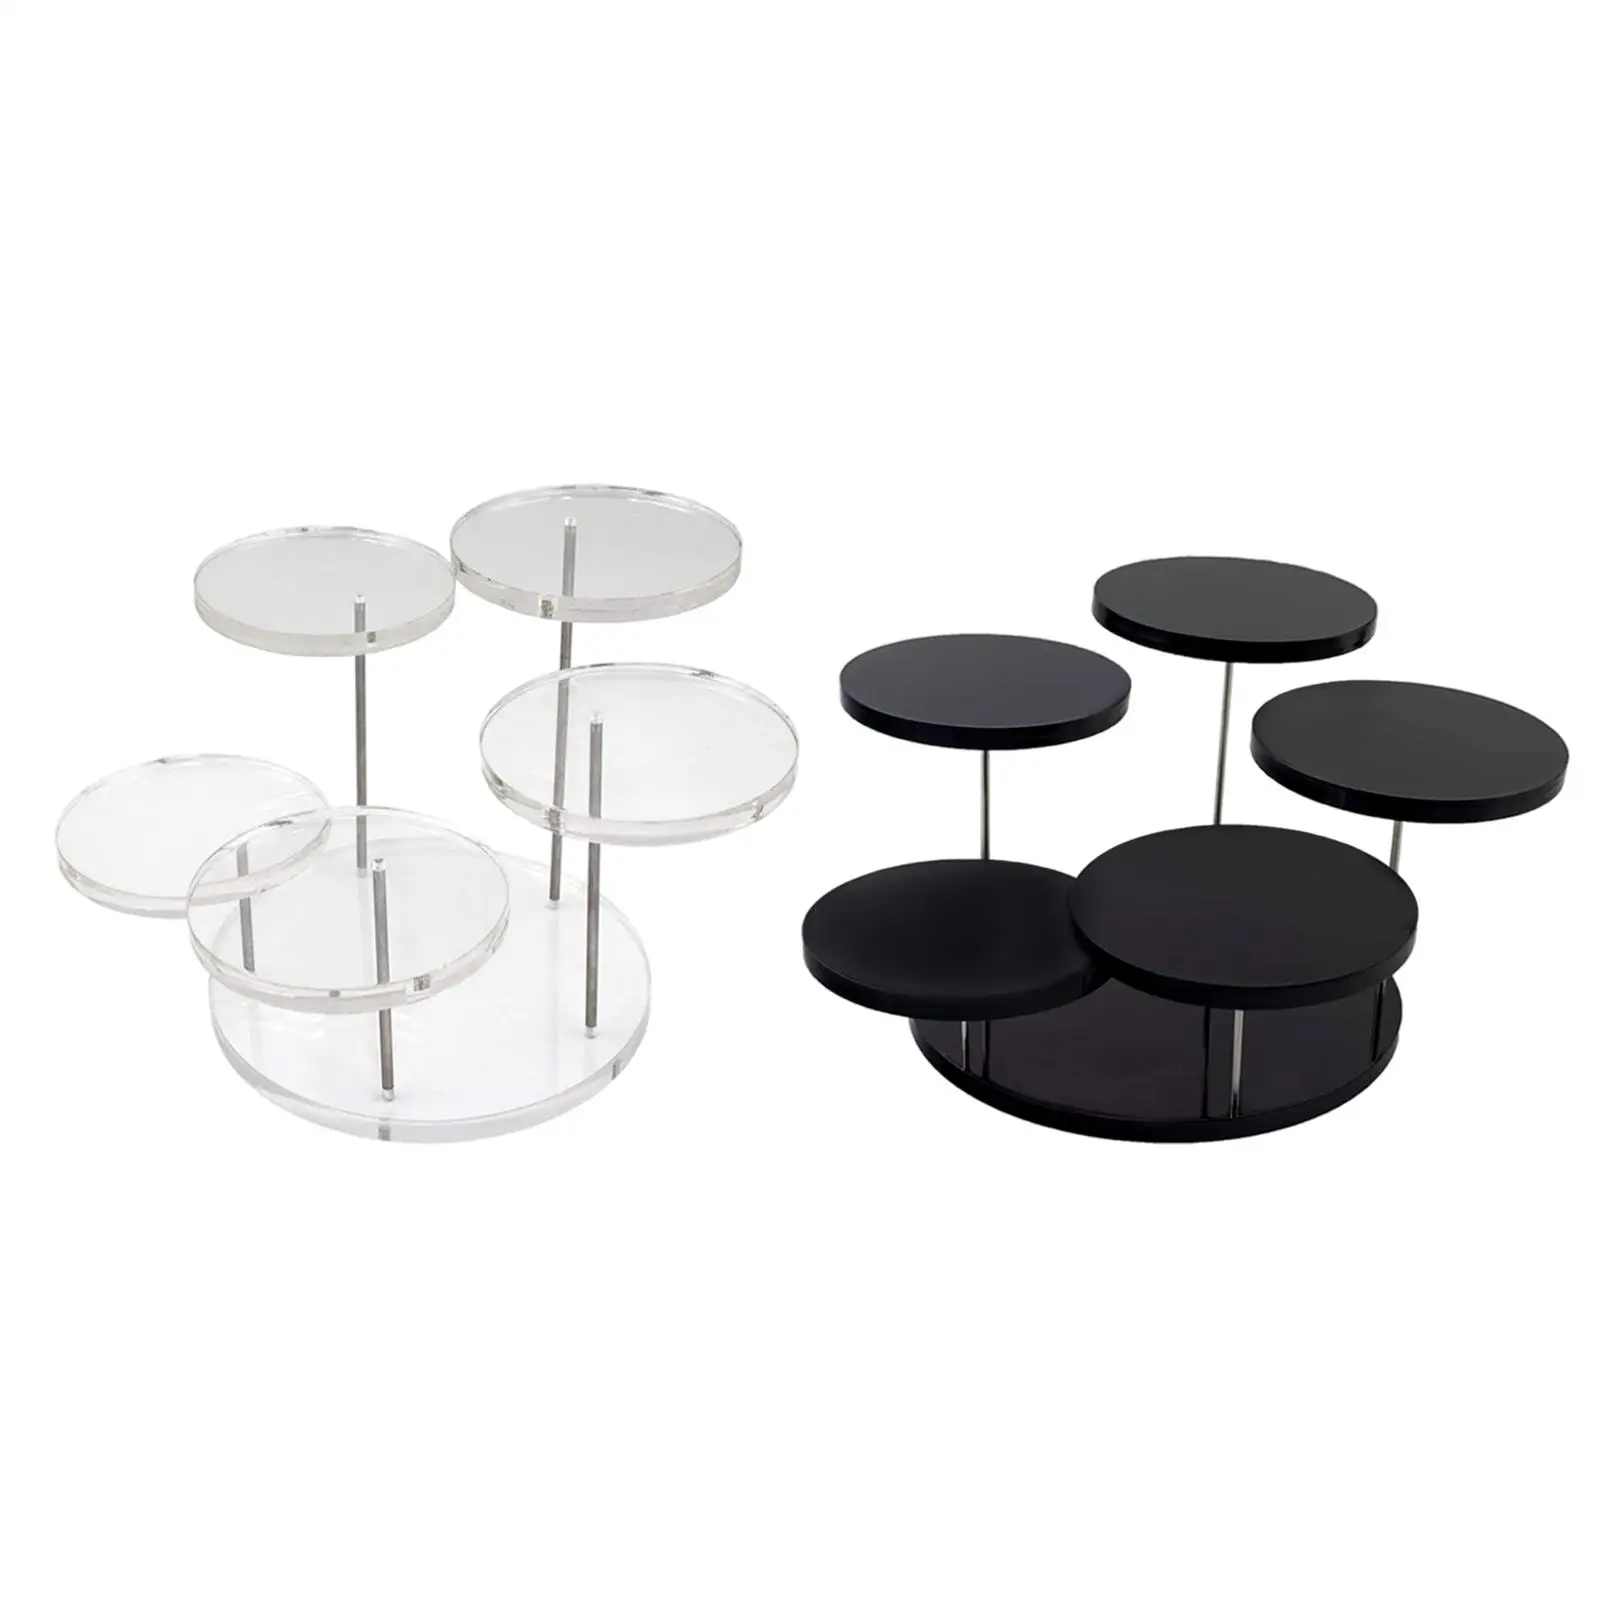 Round Jewelry Display Stand Acrylic 5 Tray Organizer Show Shelf Holder for Figurines Purse Jewellery Earring Home